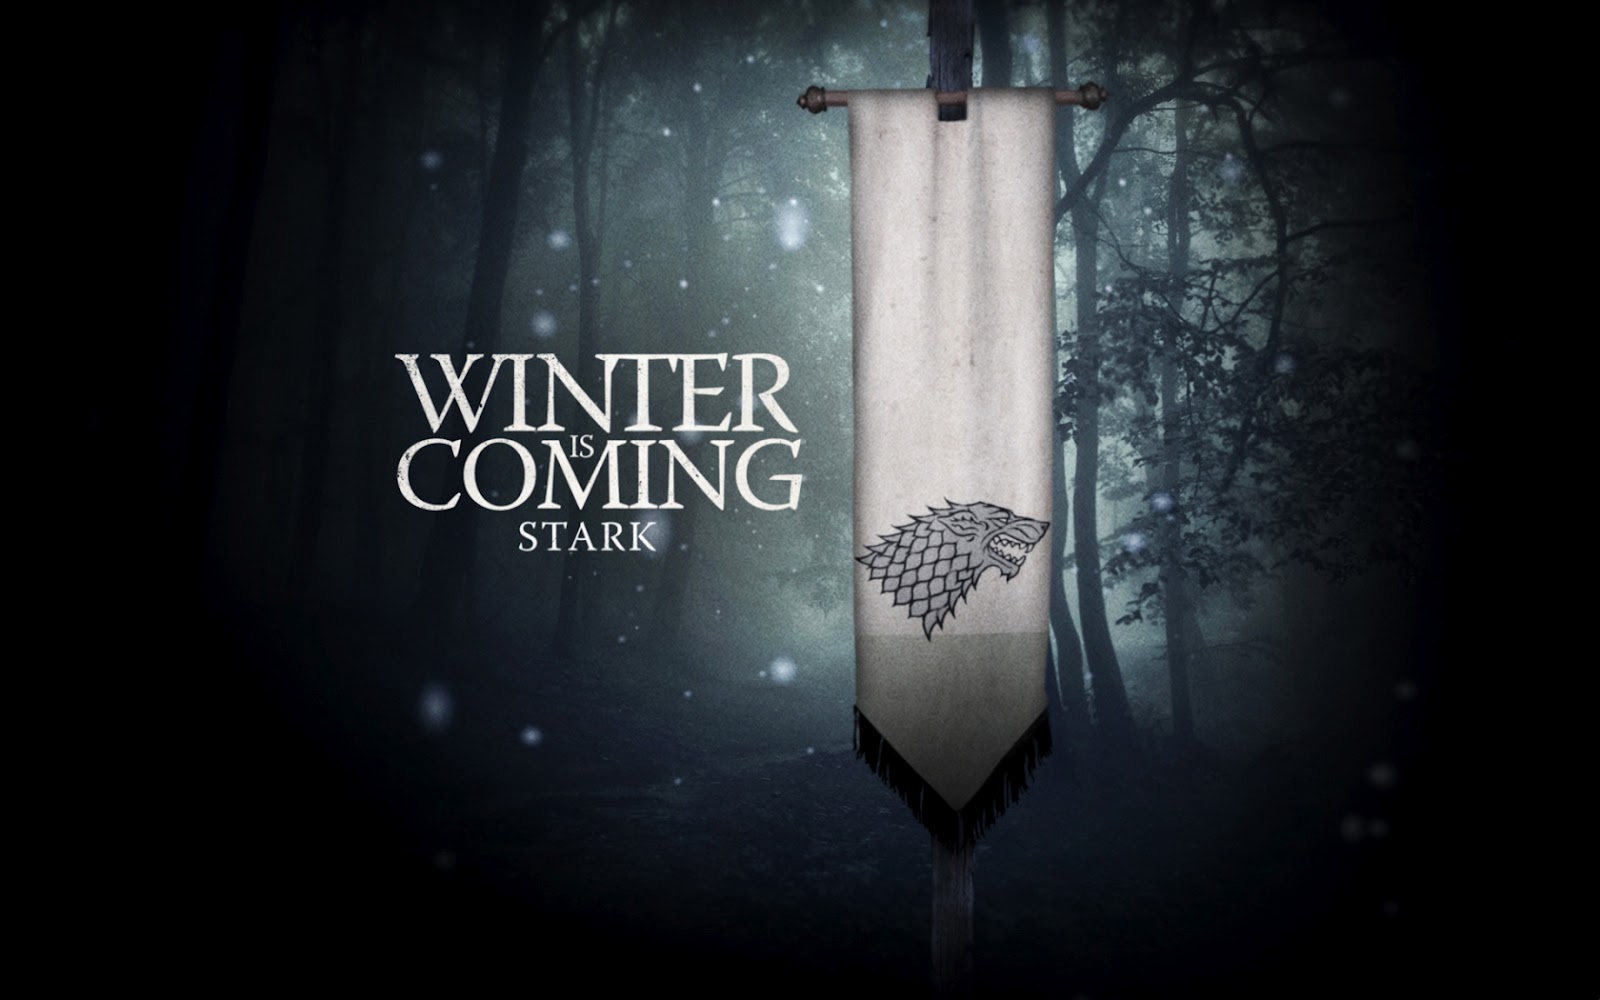 winter is coming wallpaper,font,text,logo,still life photography,darkness